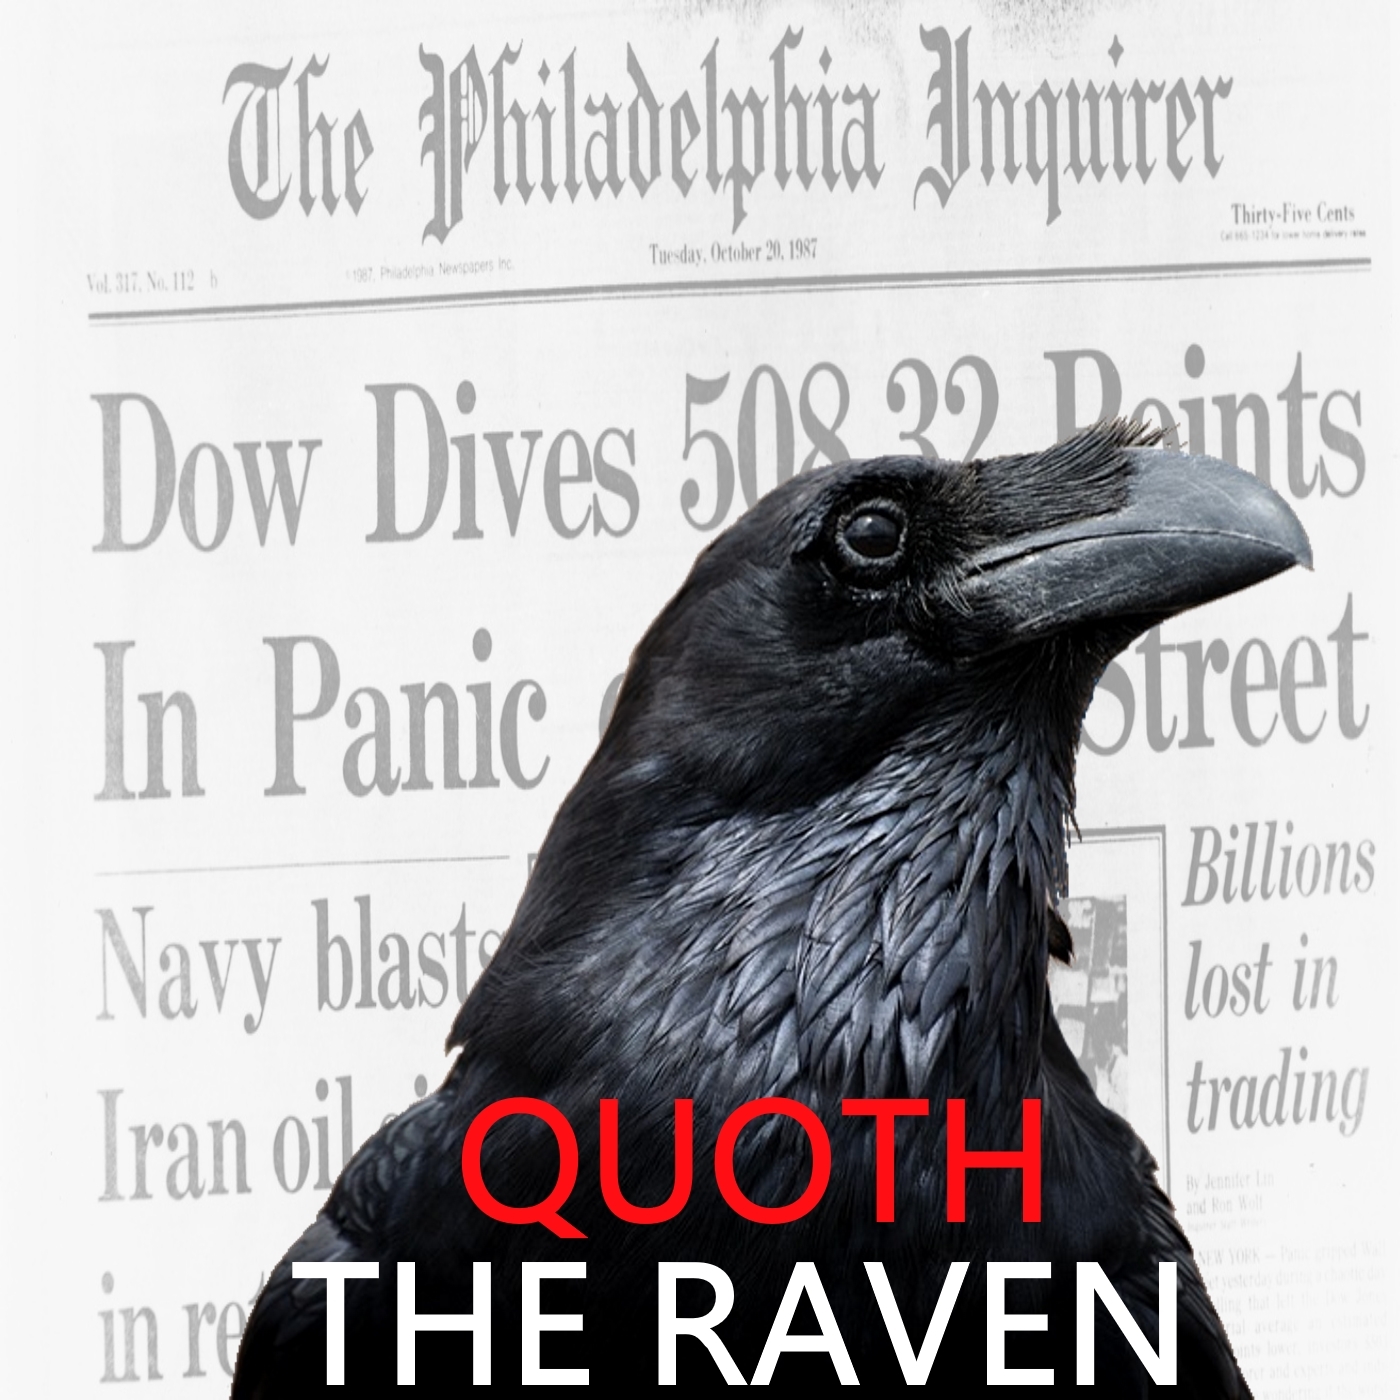 Quoth the Raven #67 - Tesla Talk: Shitting on the Factory Floor Edition